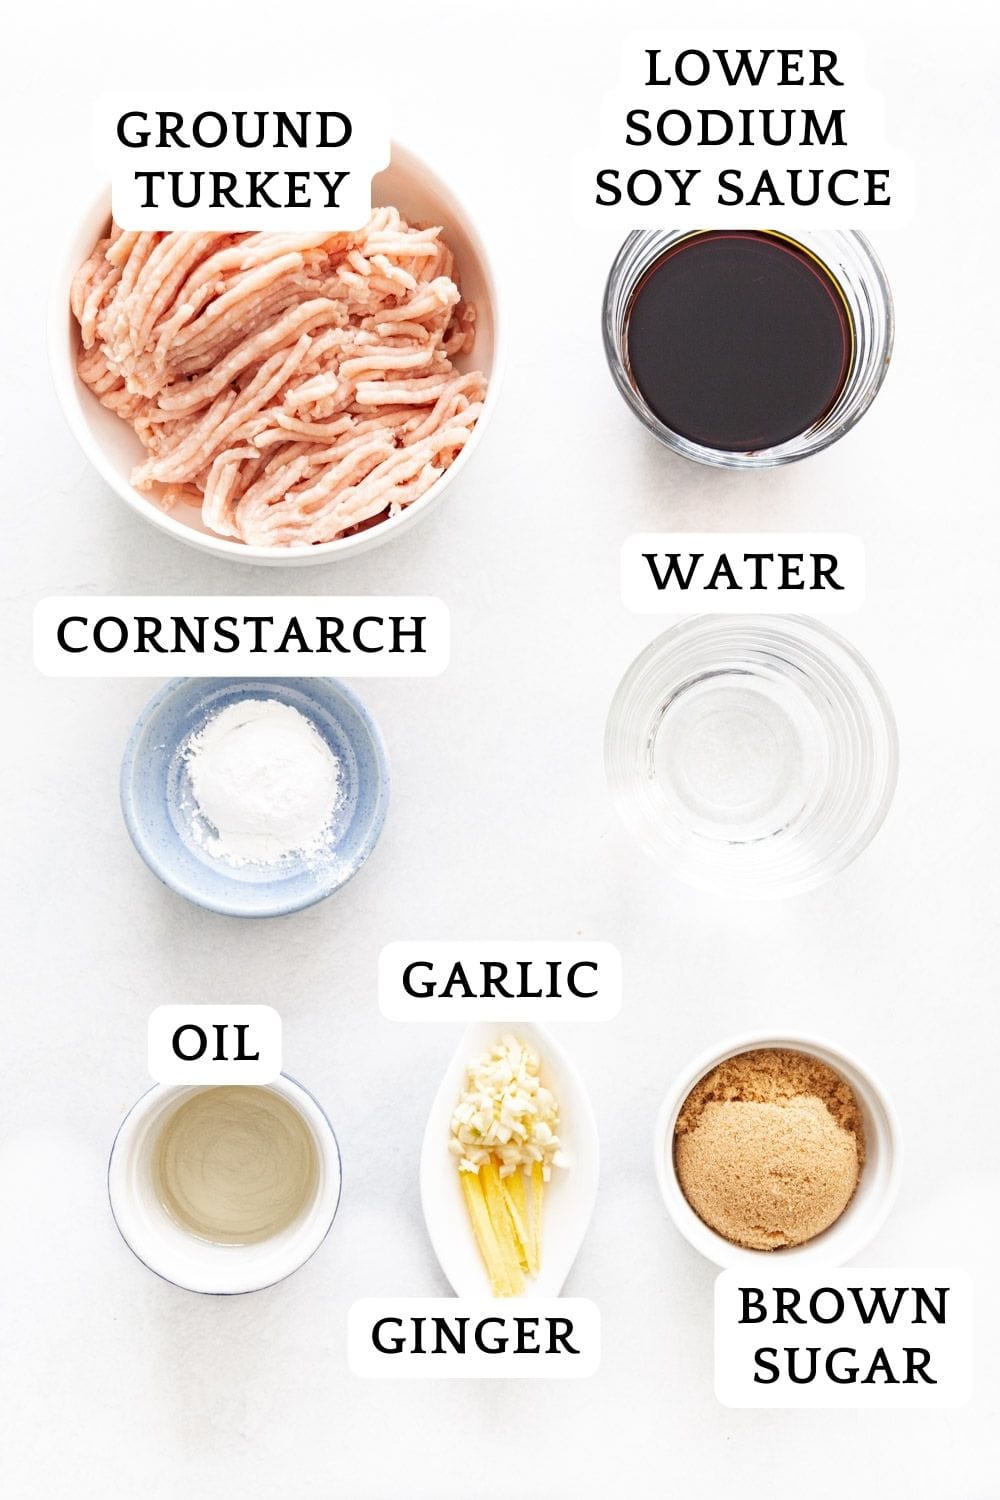 Labeled ingredients for this recipe.